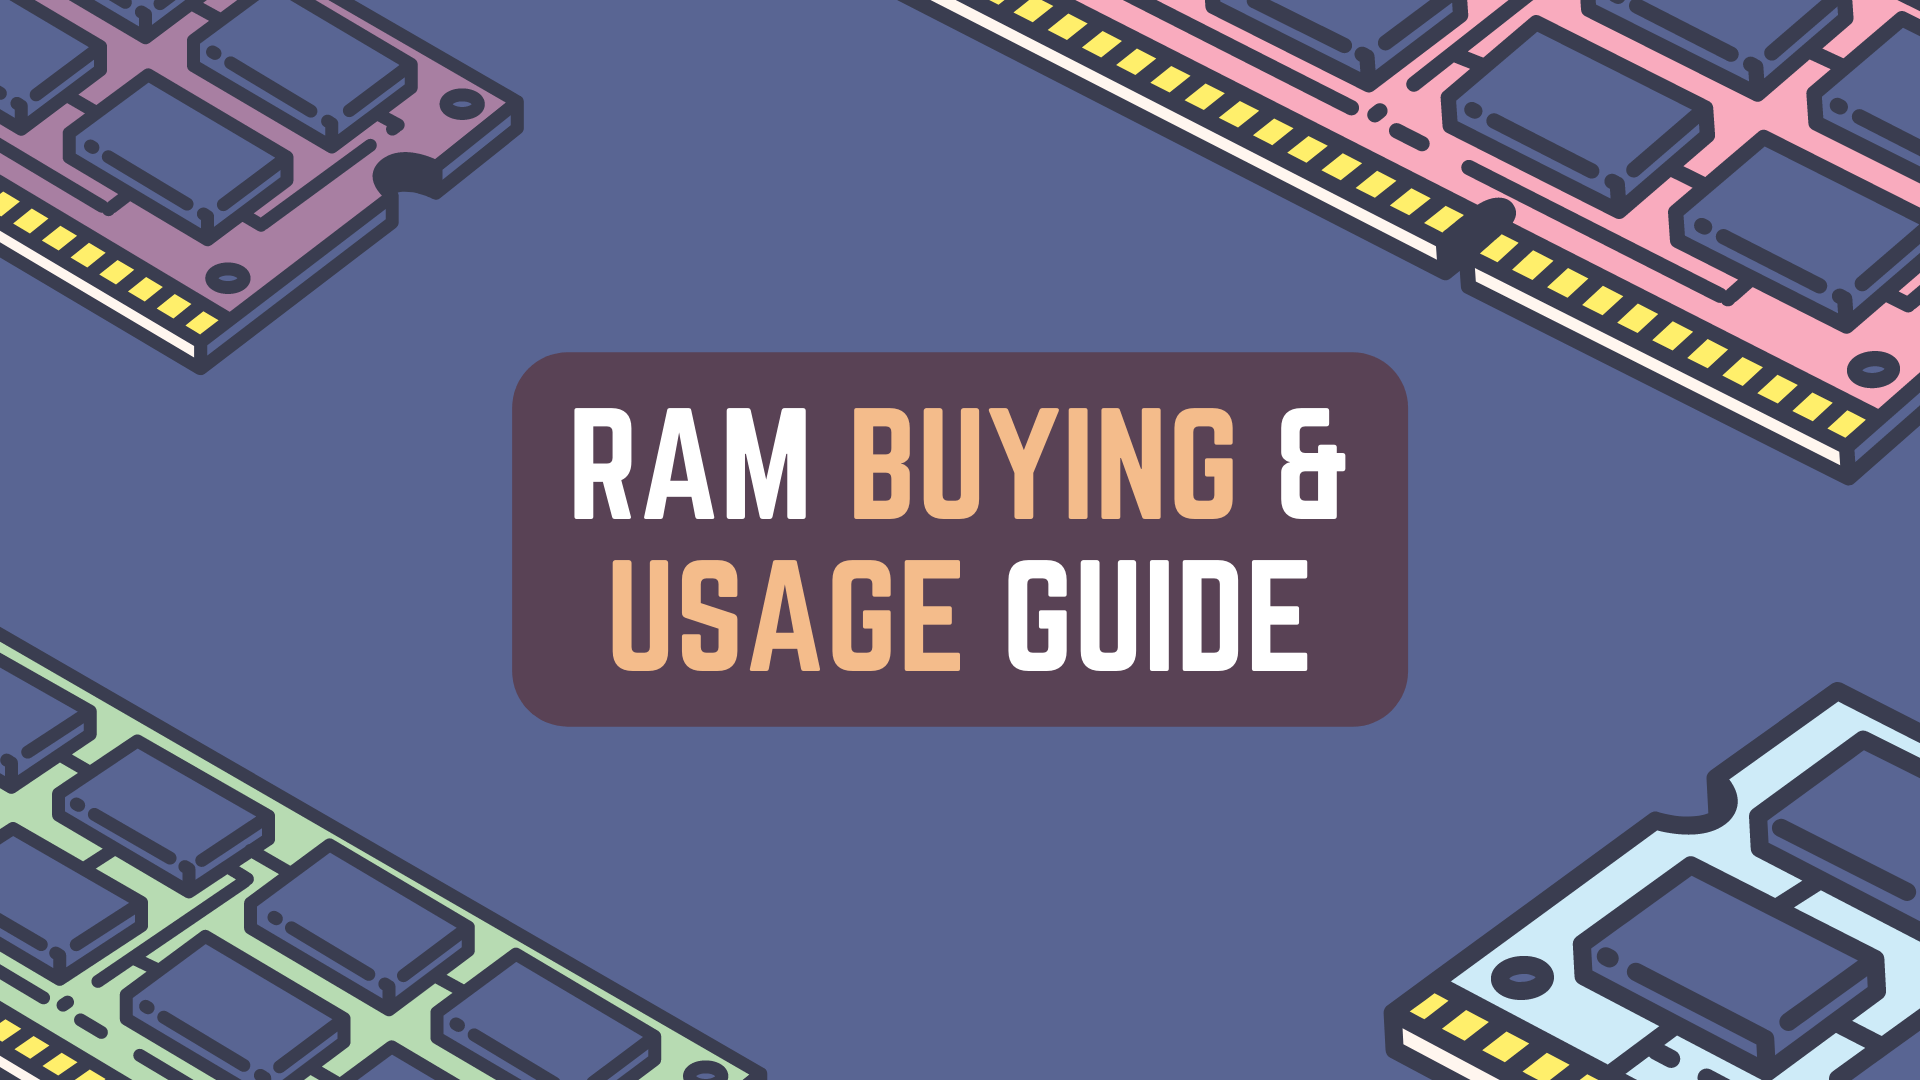 RAM Buying & Usage Guide | DDR4, DDR5 RAM Recommendations | RAM, DRAM, SDRAM, DDR RAM, Memory | Product Guides - Featured Image